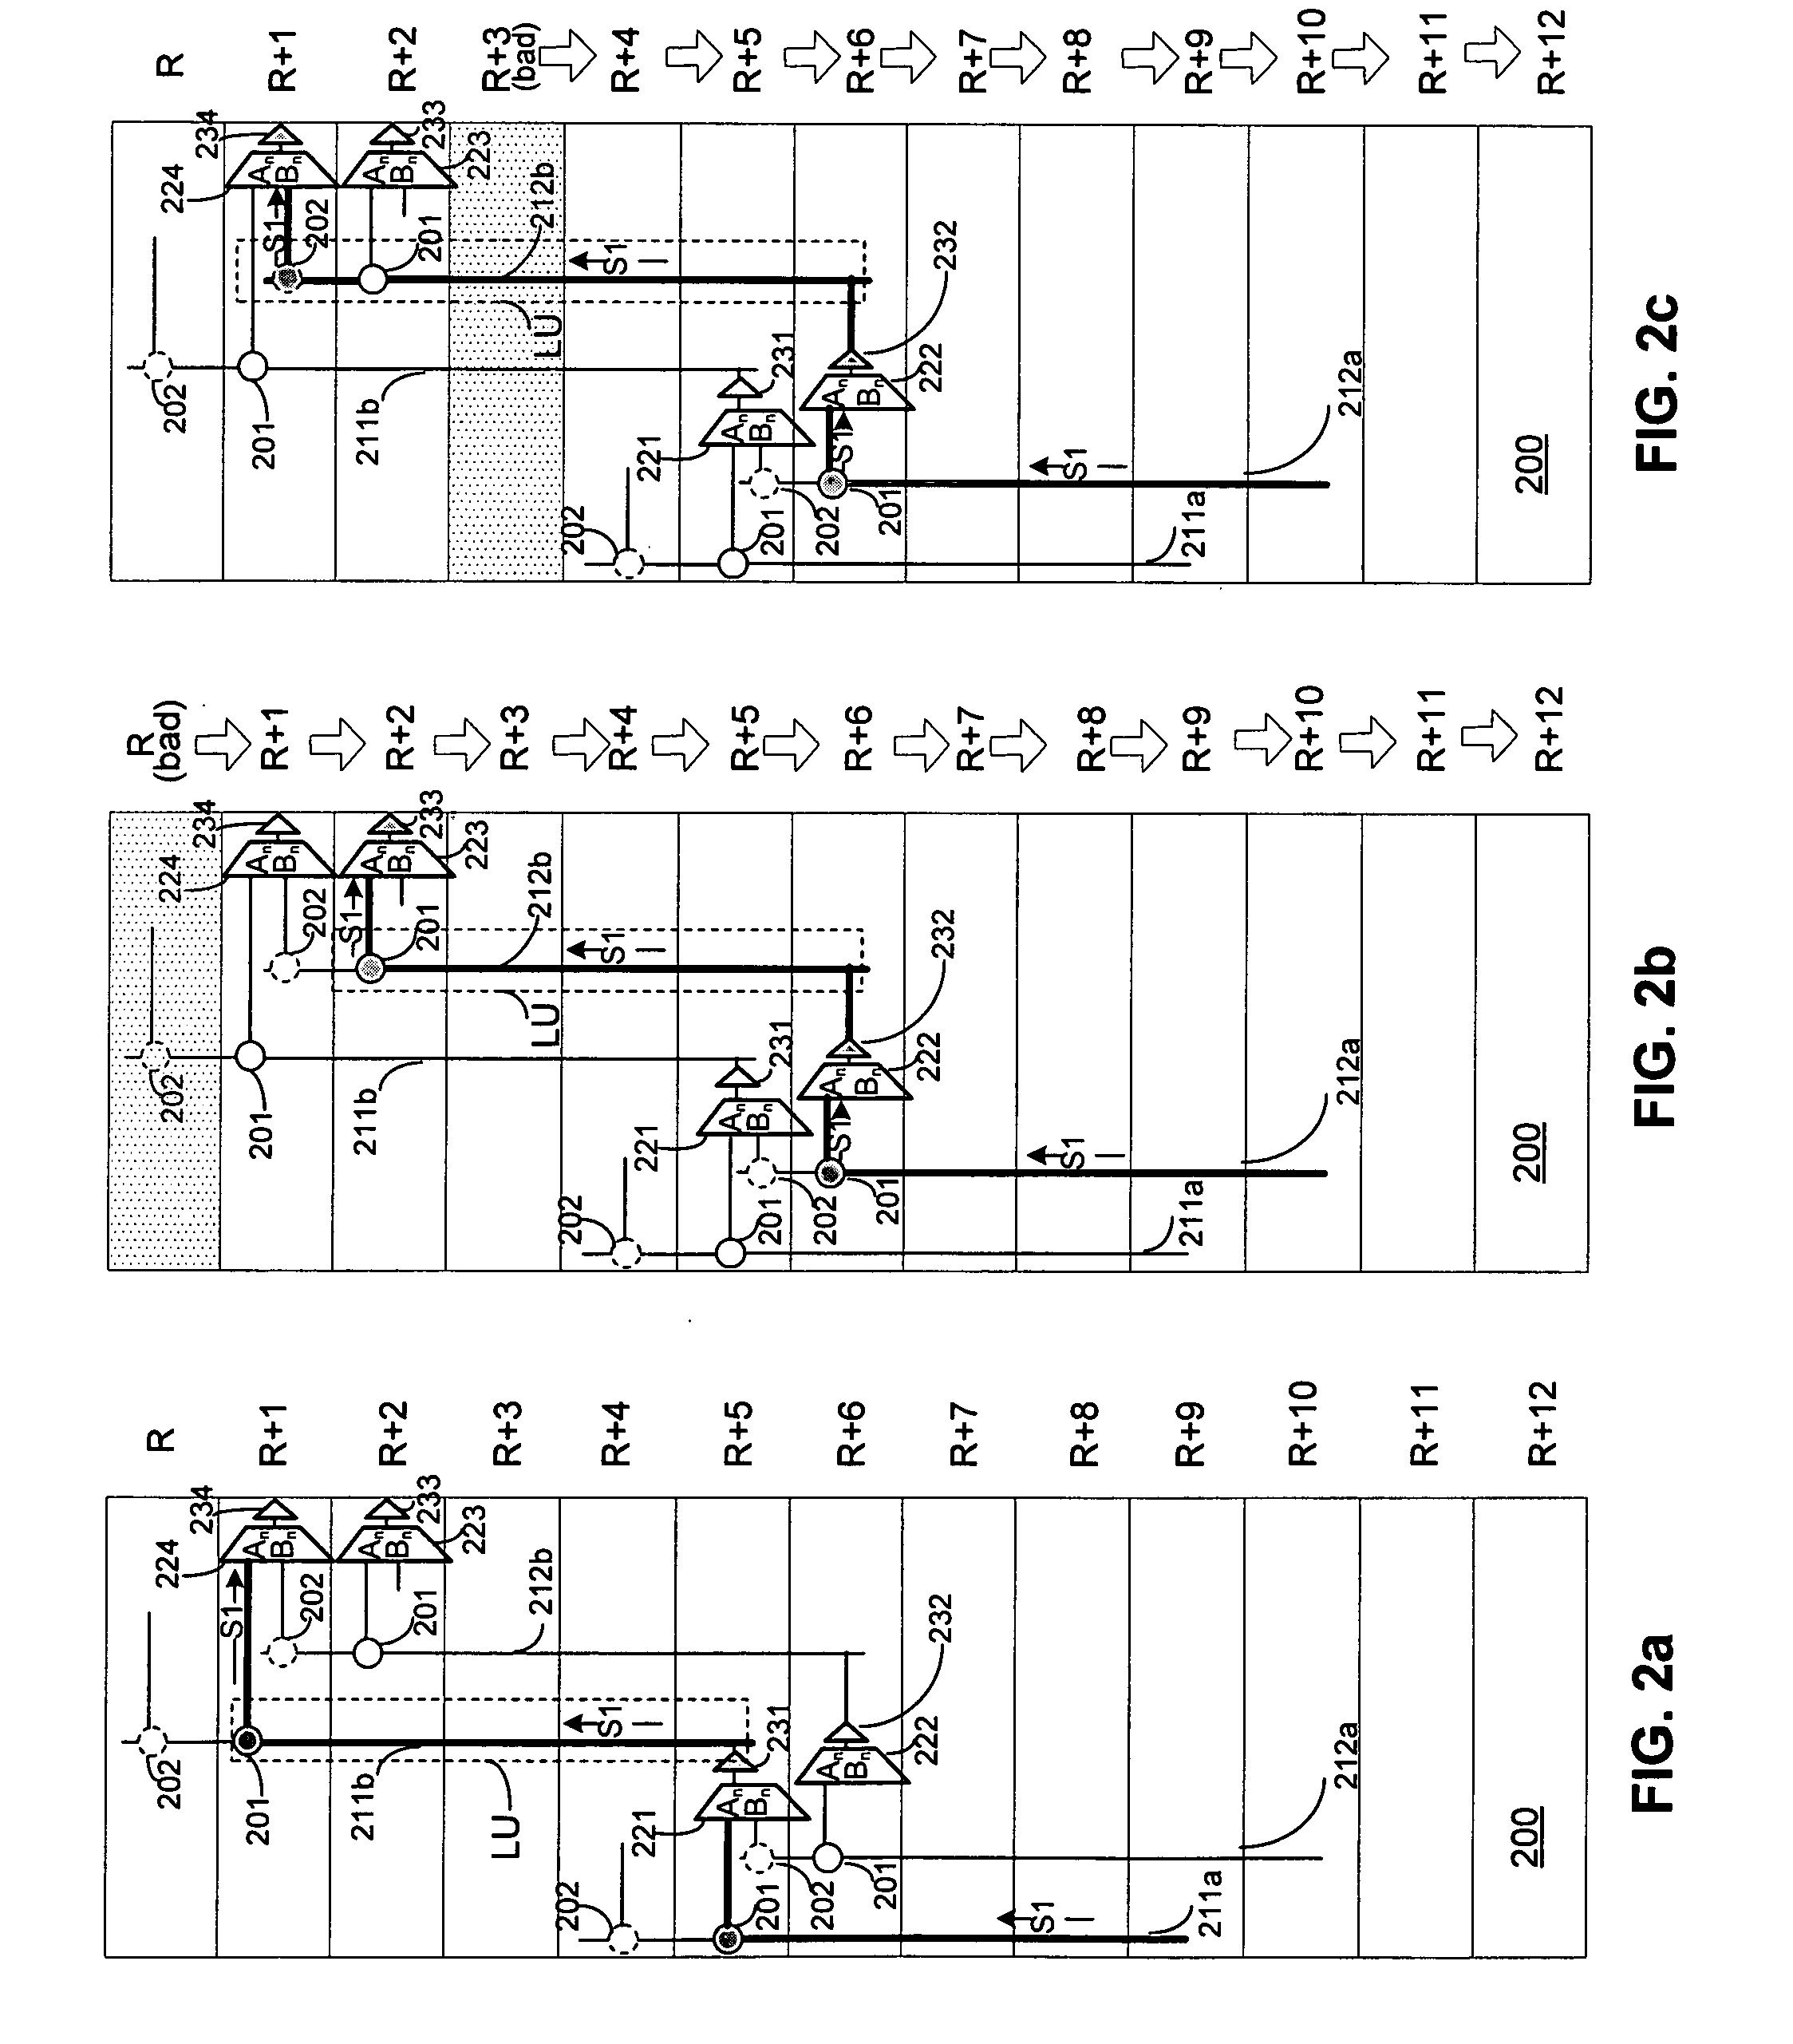 Redundancy structures and methods in a programmable logic device